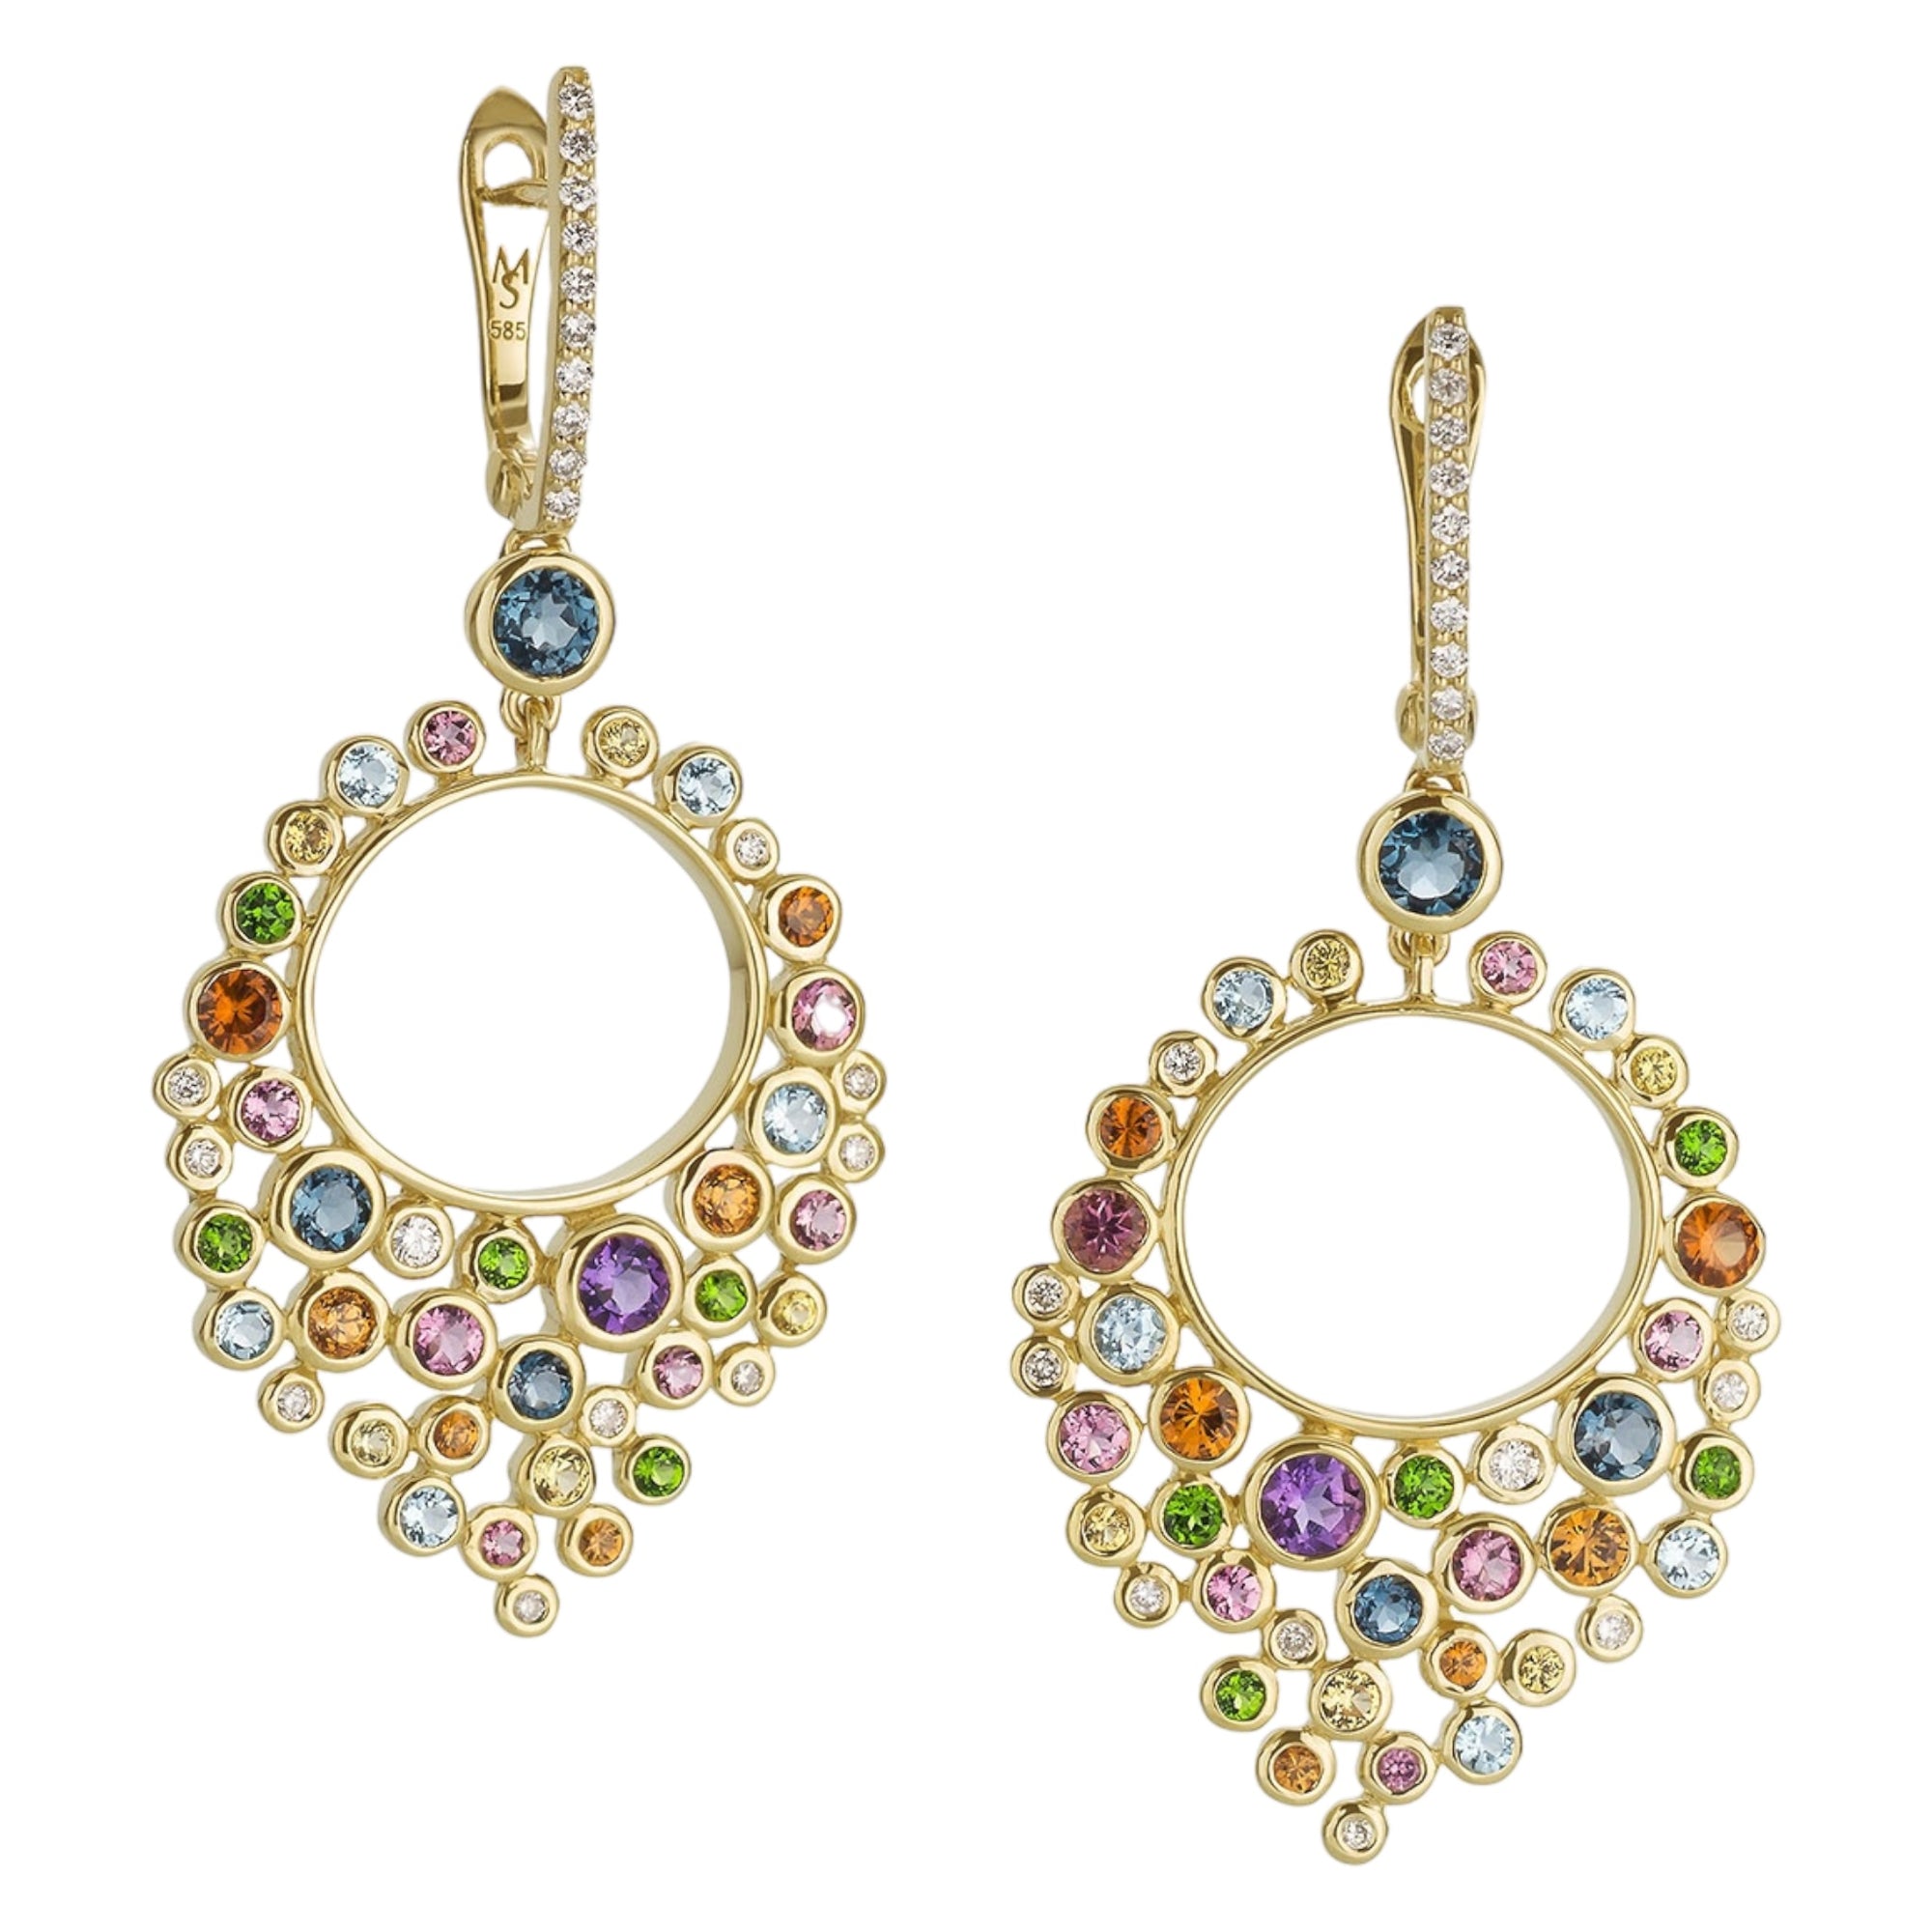 Solstice Dangle Earrings by Martha Seely available at Talisman Collection Fine Jewelers in El Dorado Hills, CA and online. Sparkling, colorful dangle earrings from Martha Seely's Constellation Collection. These are crafted in 14k gold with 2.75 cts of multi-color gemstones and 0.23cts of diamonds. Lightweight and fun to wear, these will take you to from errands to parties. The earrings measure 1.5” L x 0.85” W, and have post backs.